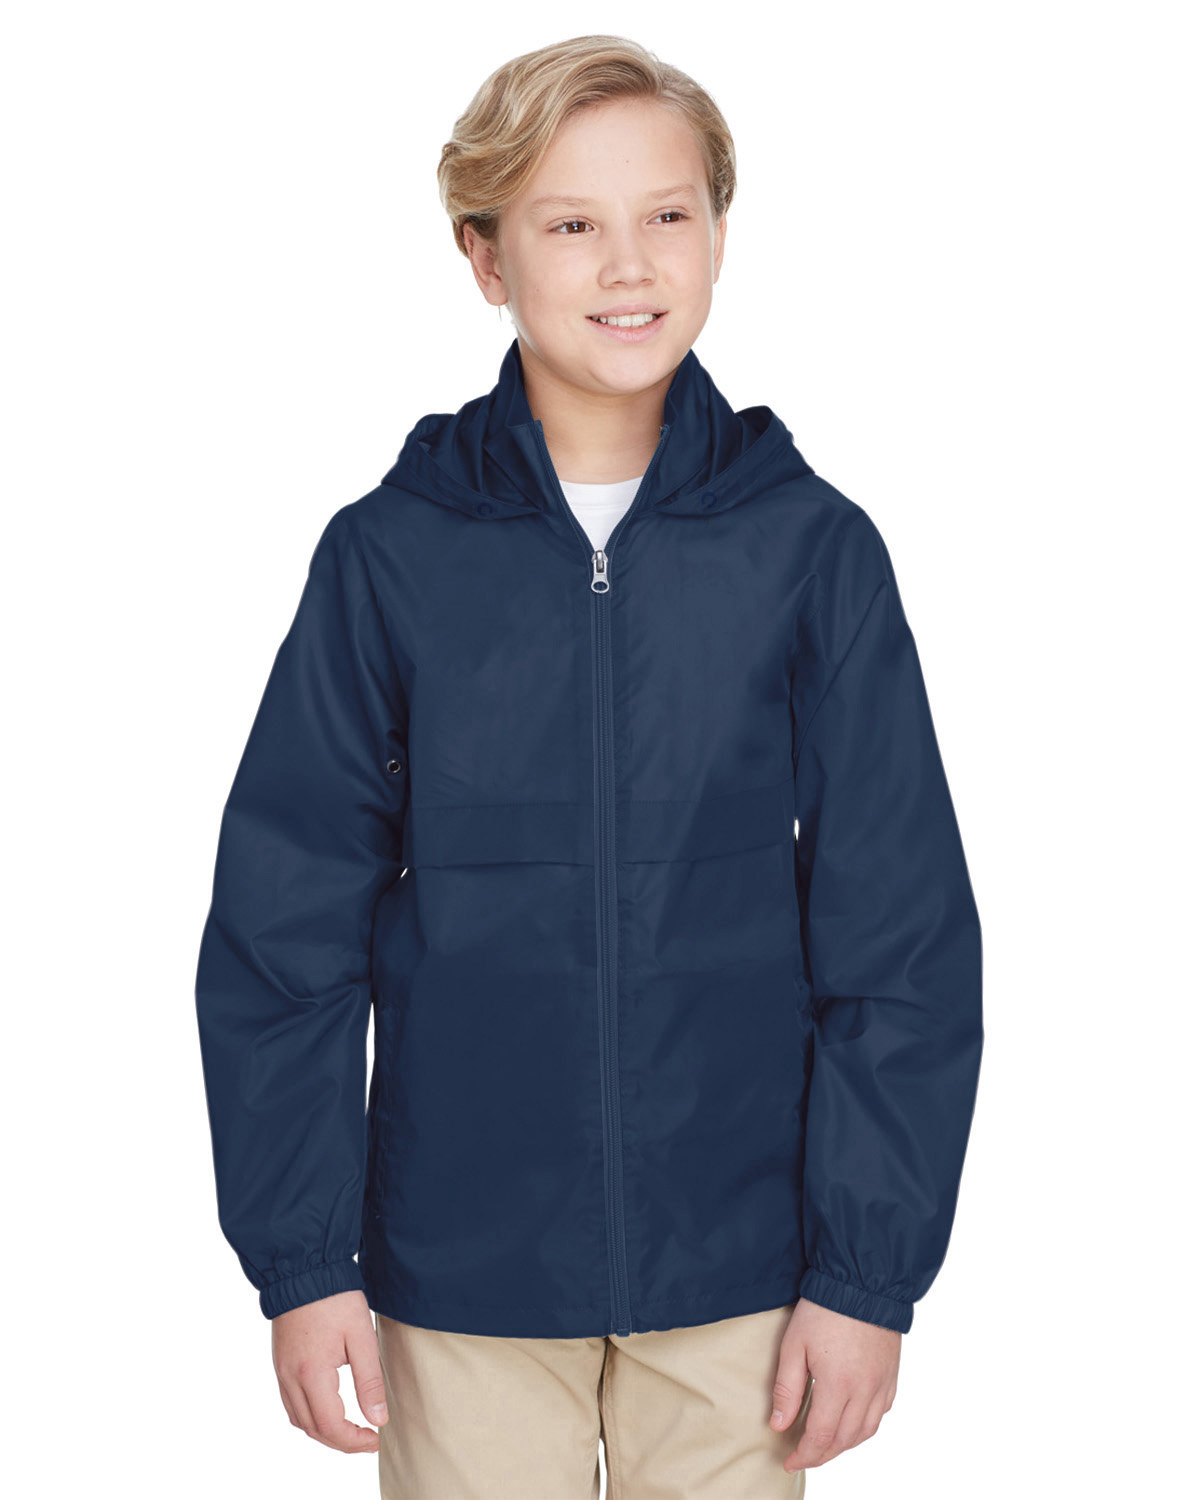 Team 365, The Youth Zone Protect Lightweight Jacket - SPORT DARK NAVY - L - image 1 of 2